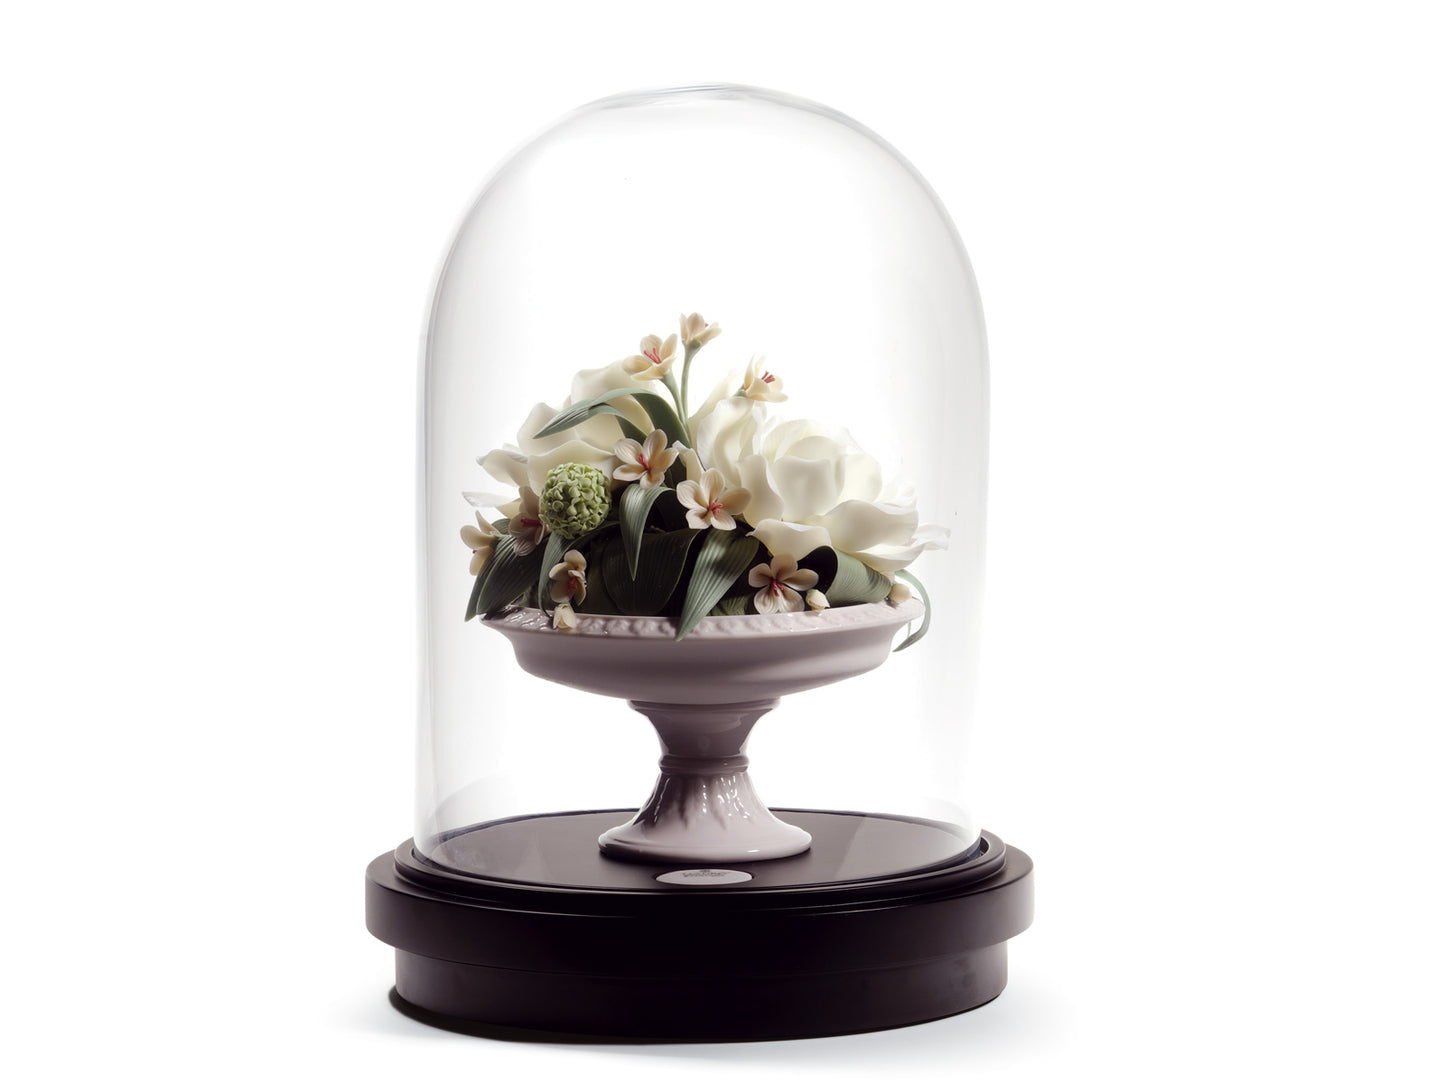 Lladro Camellia Centrepiece (Limited Edition of 500)